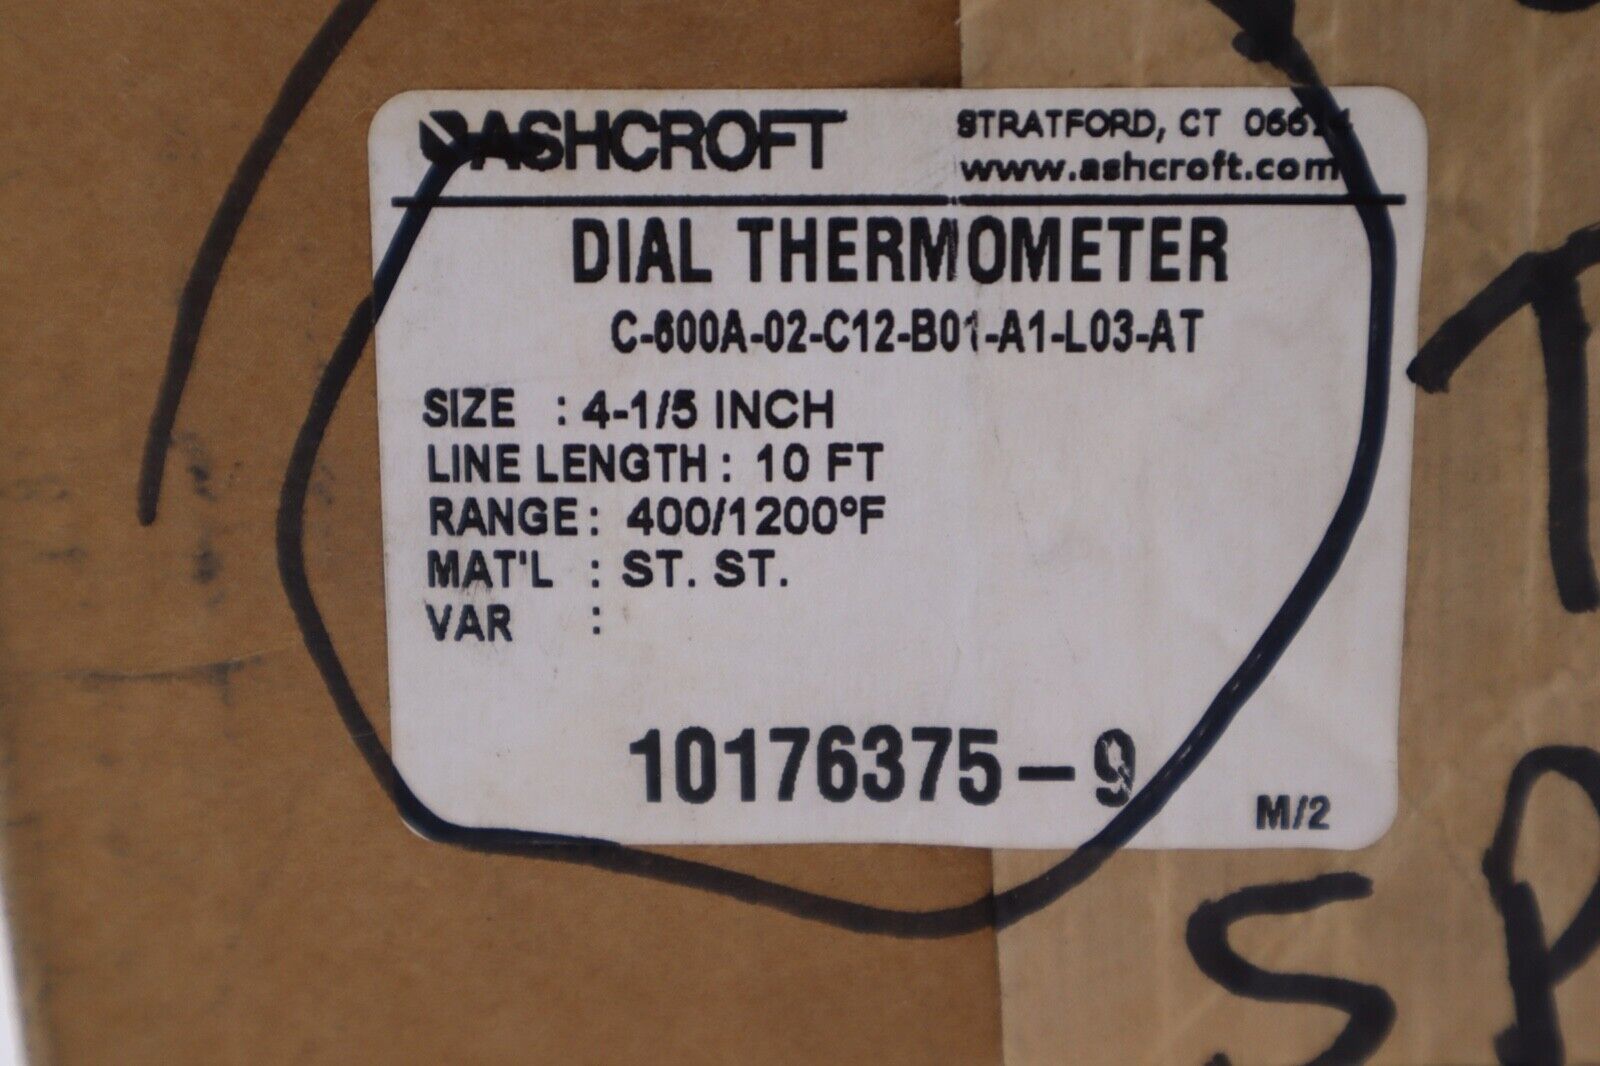 ASHCROFT DIAL THERMOMETER C-600A-02-C12-B01-A1-L03-AT #2368